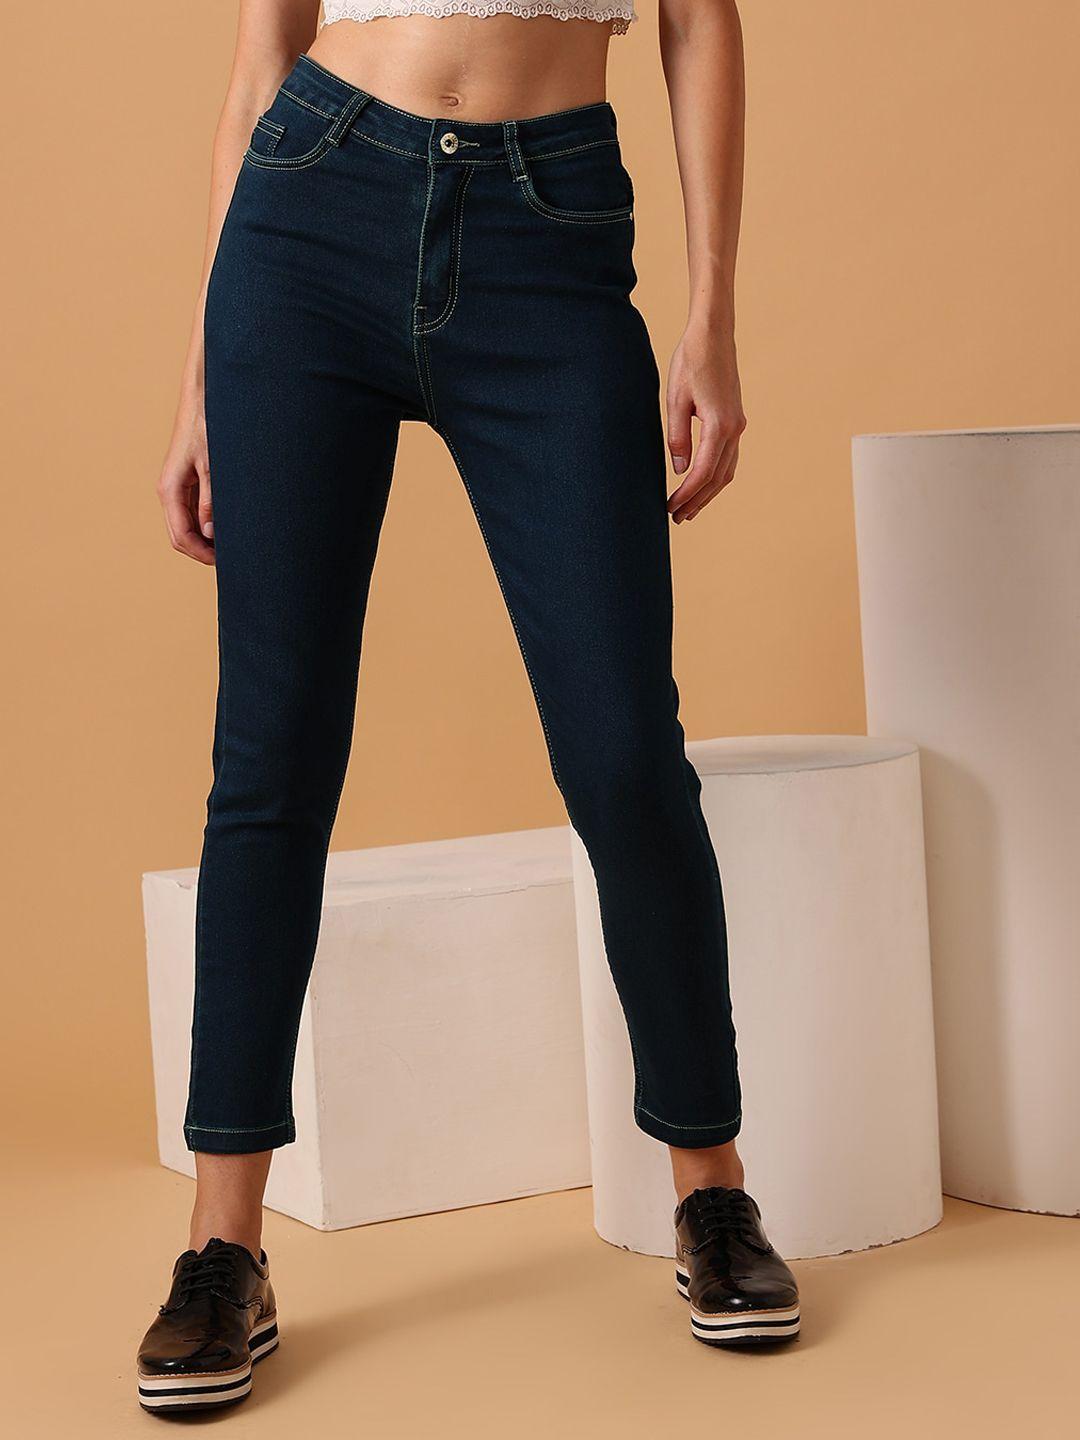 street 9 women narrow slim fit clean look stretchable jeans